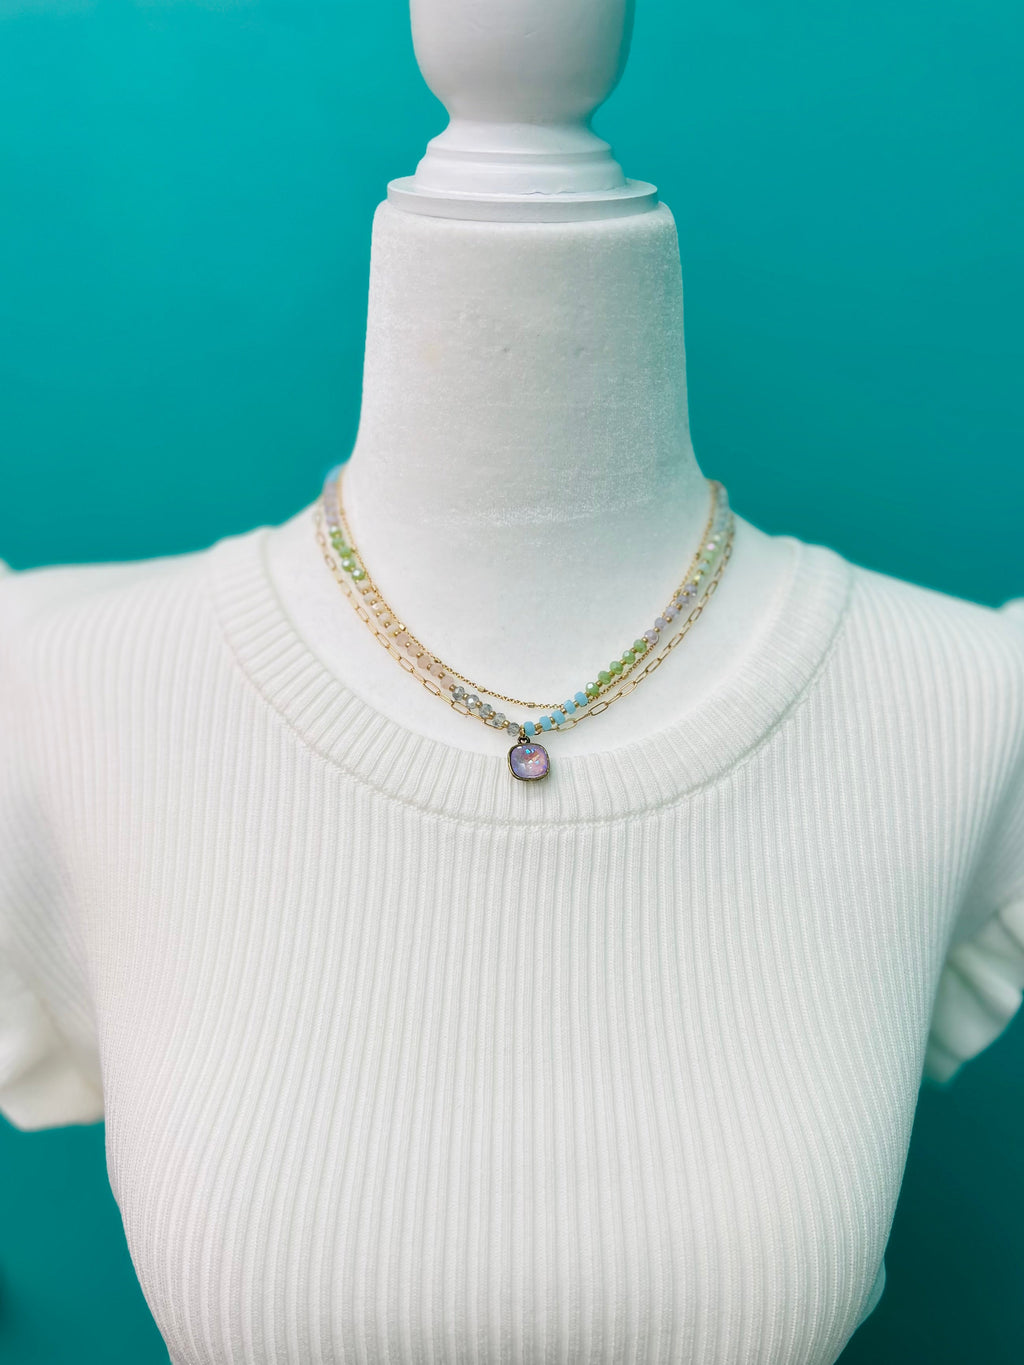 Panache and Pastel Necklace | gussieduponline